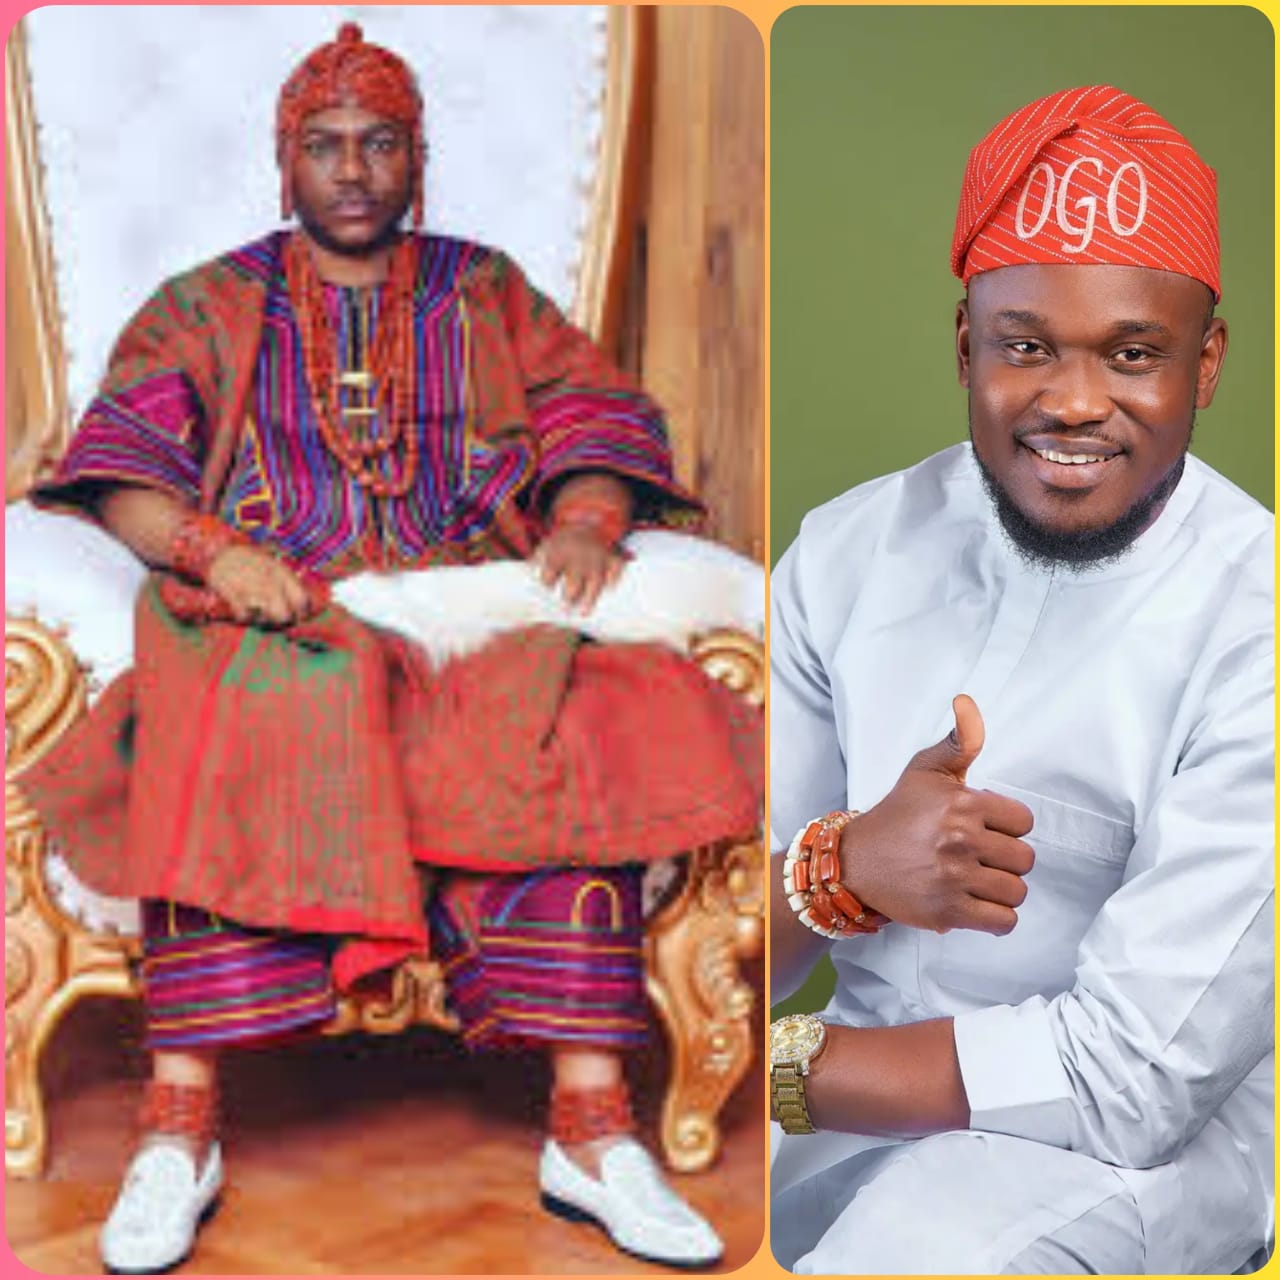 OGUNDARE CONGRATULATES OLOWO ON APPOINTMENT AS CHANCELLOR, APPLAUDS HIS COMMITMENT TO EDUCATION